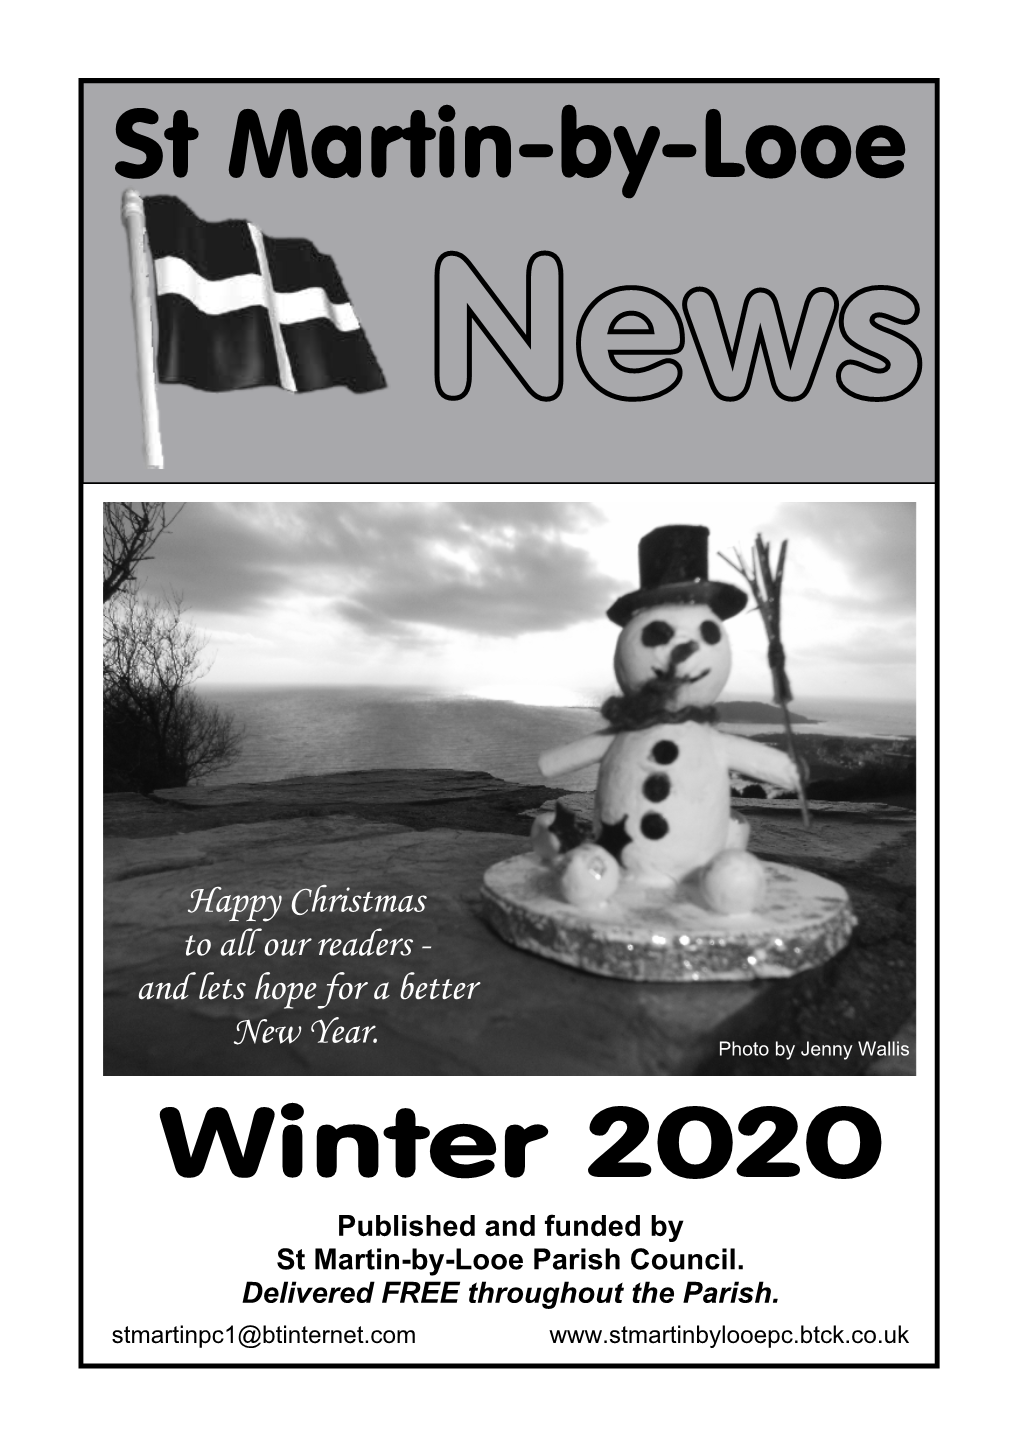 Winter 2020 Published and Funded by St Martin-By-Looe Parish Council